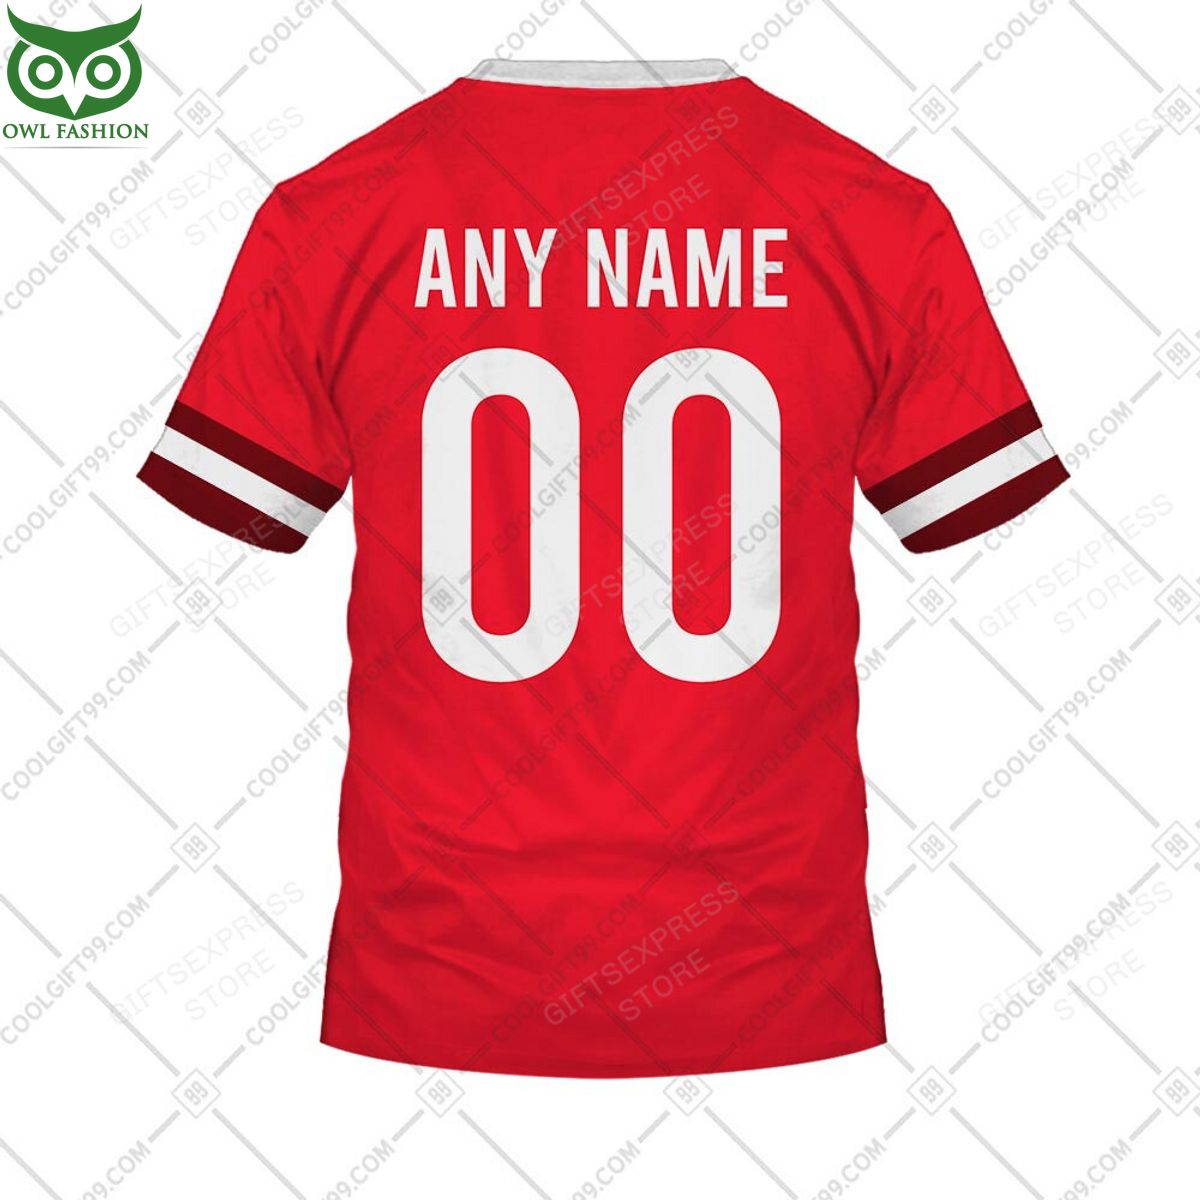 rugby world cup wales home jersey personalized 3d hoodie tshirt 4 HwOGK.jpg